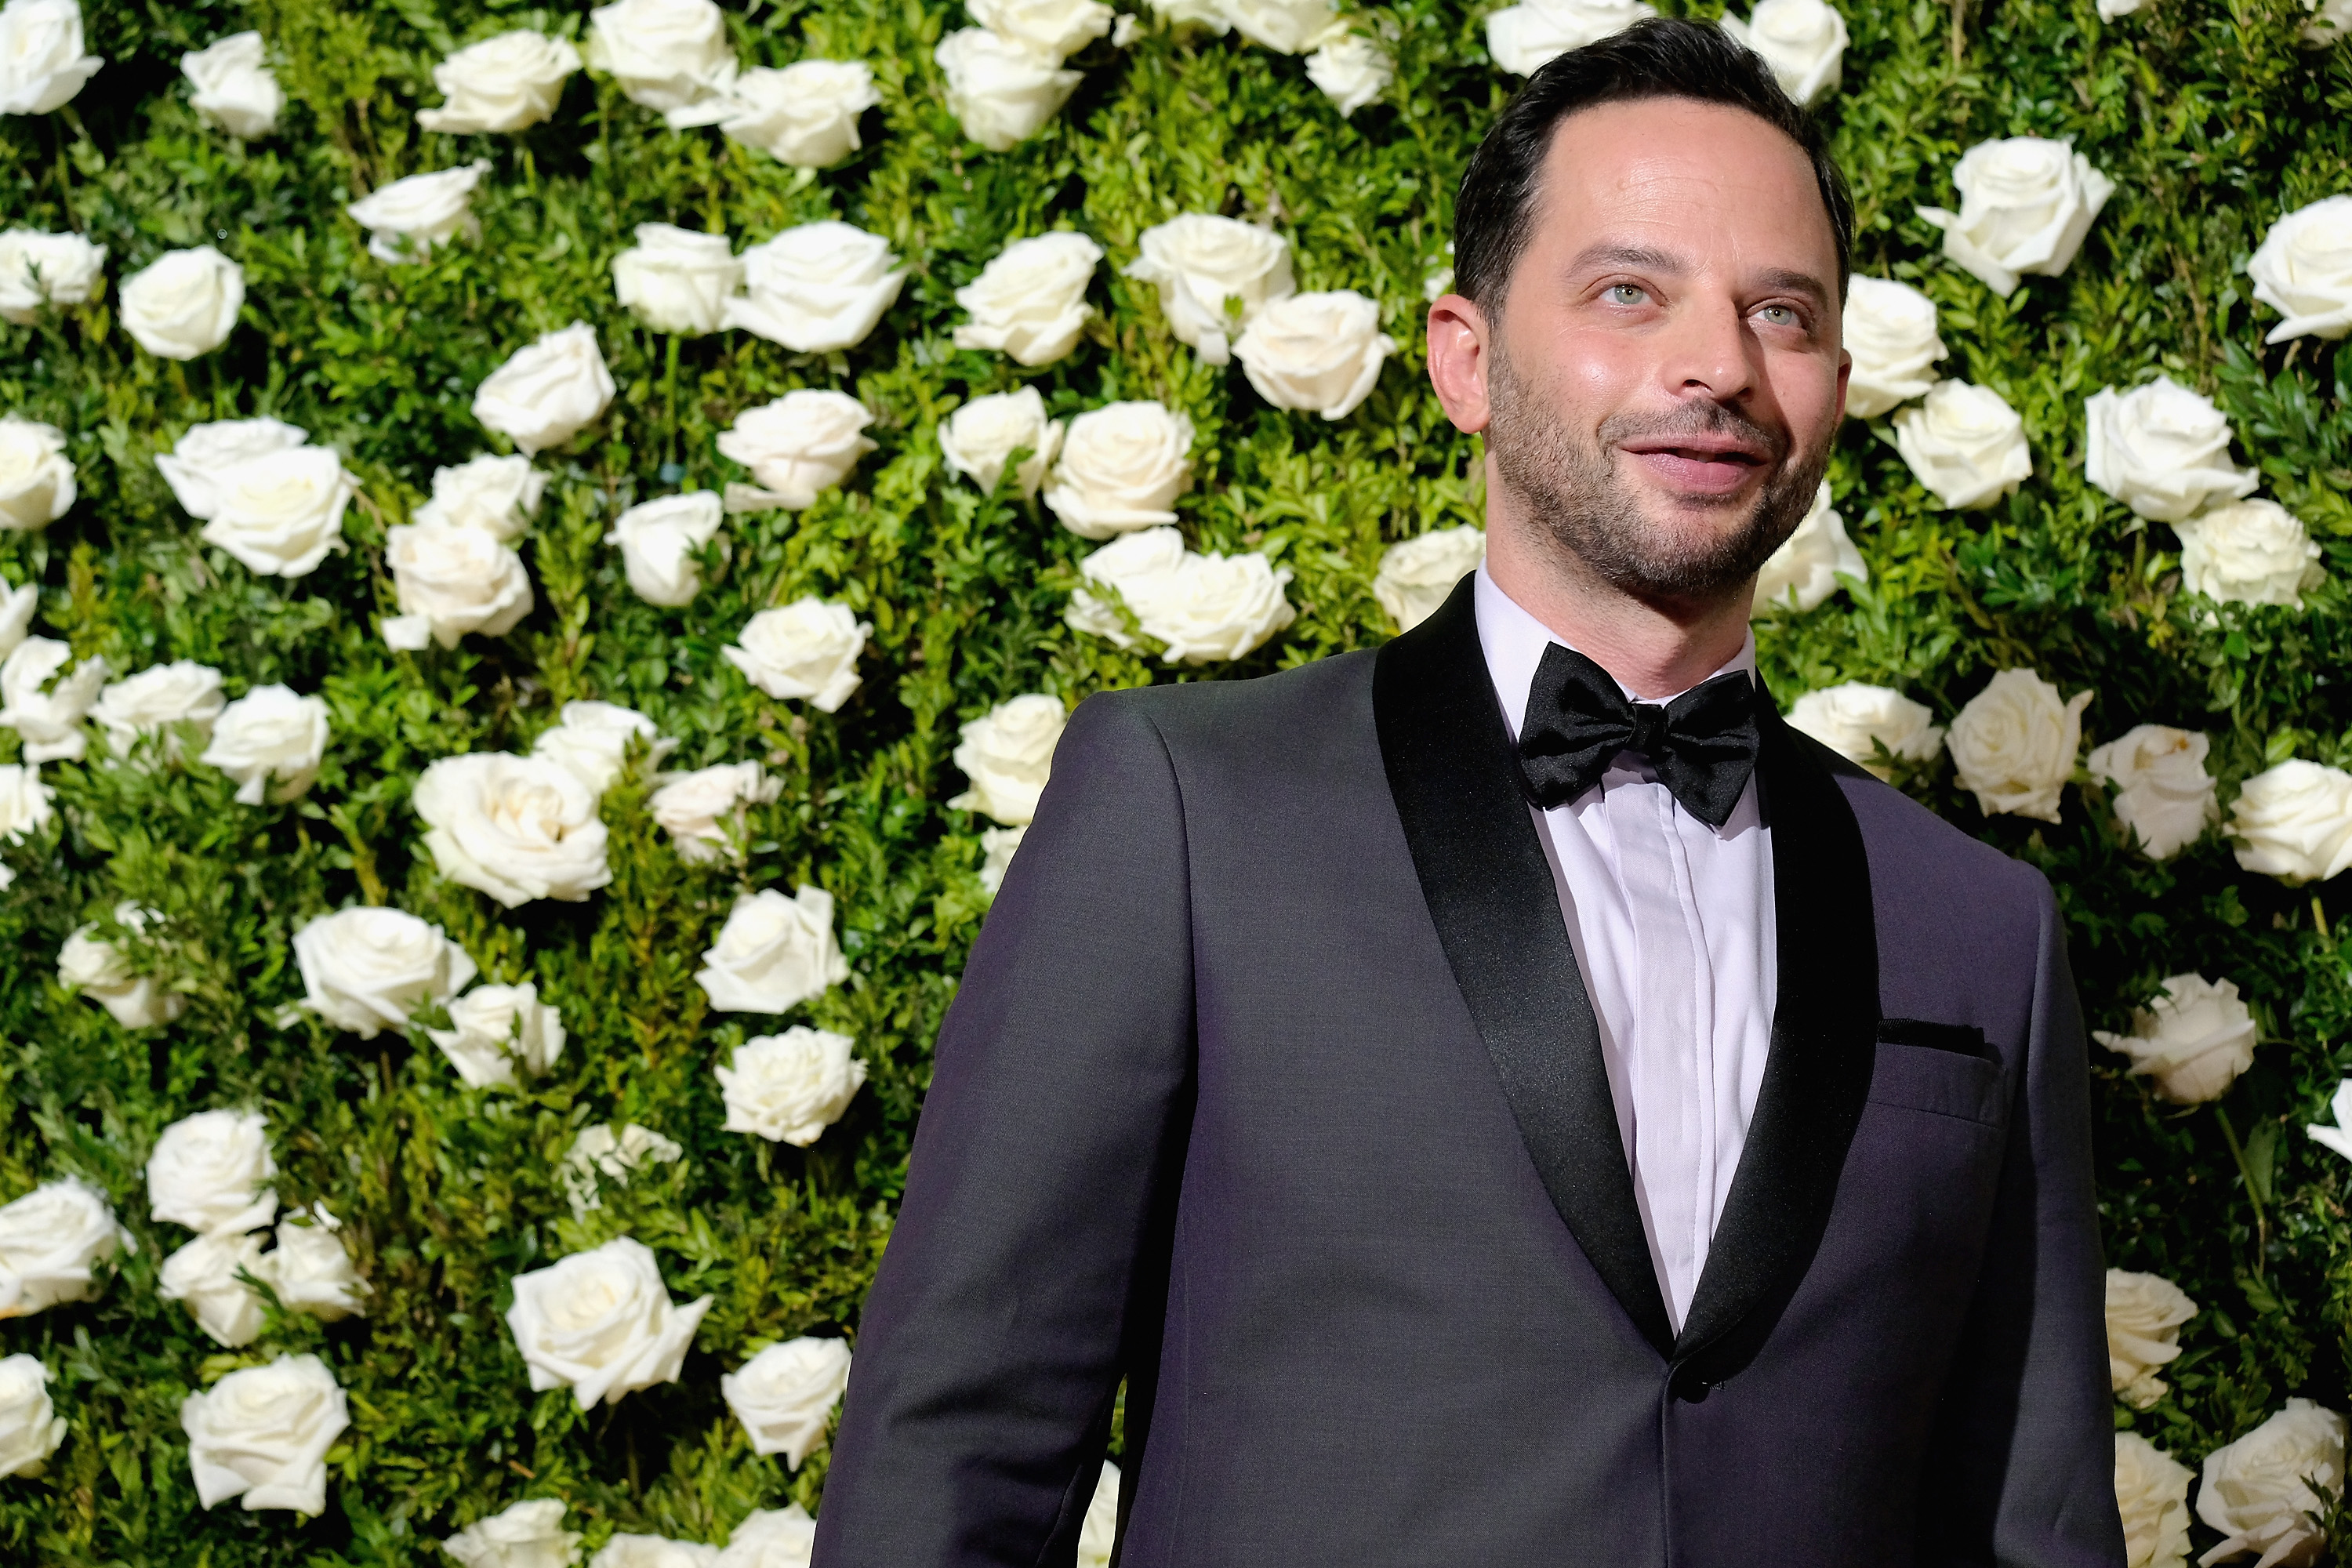 Nick Kroll attends the 2017 Tony Awards at Radio City Music Hall on June 11, 2017 in New York City. (Jemal Countess&mdash;Getty Images for Tony Awards Productions)